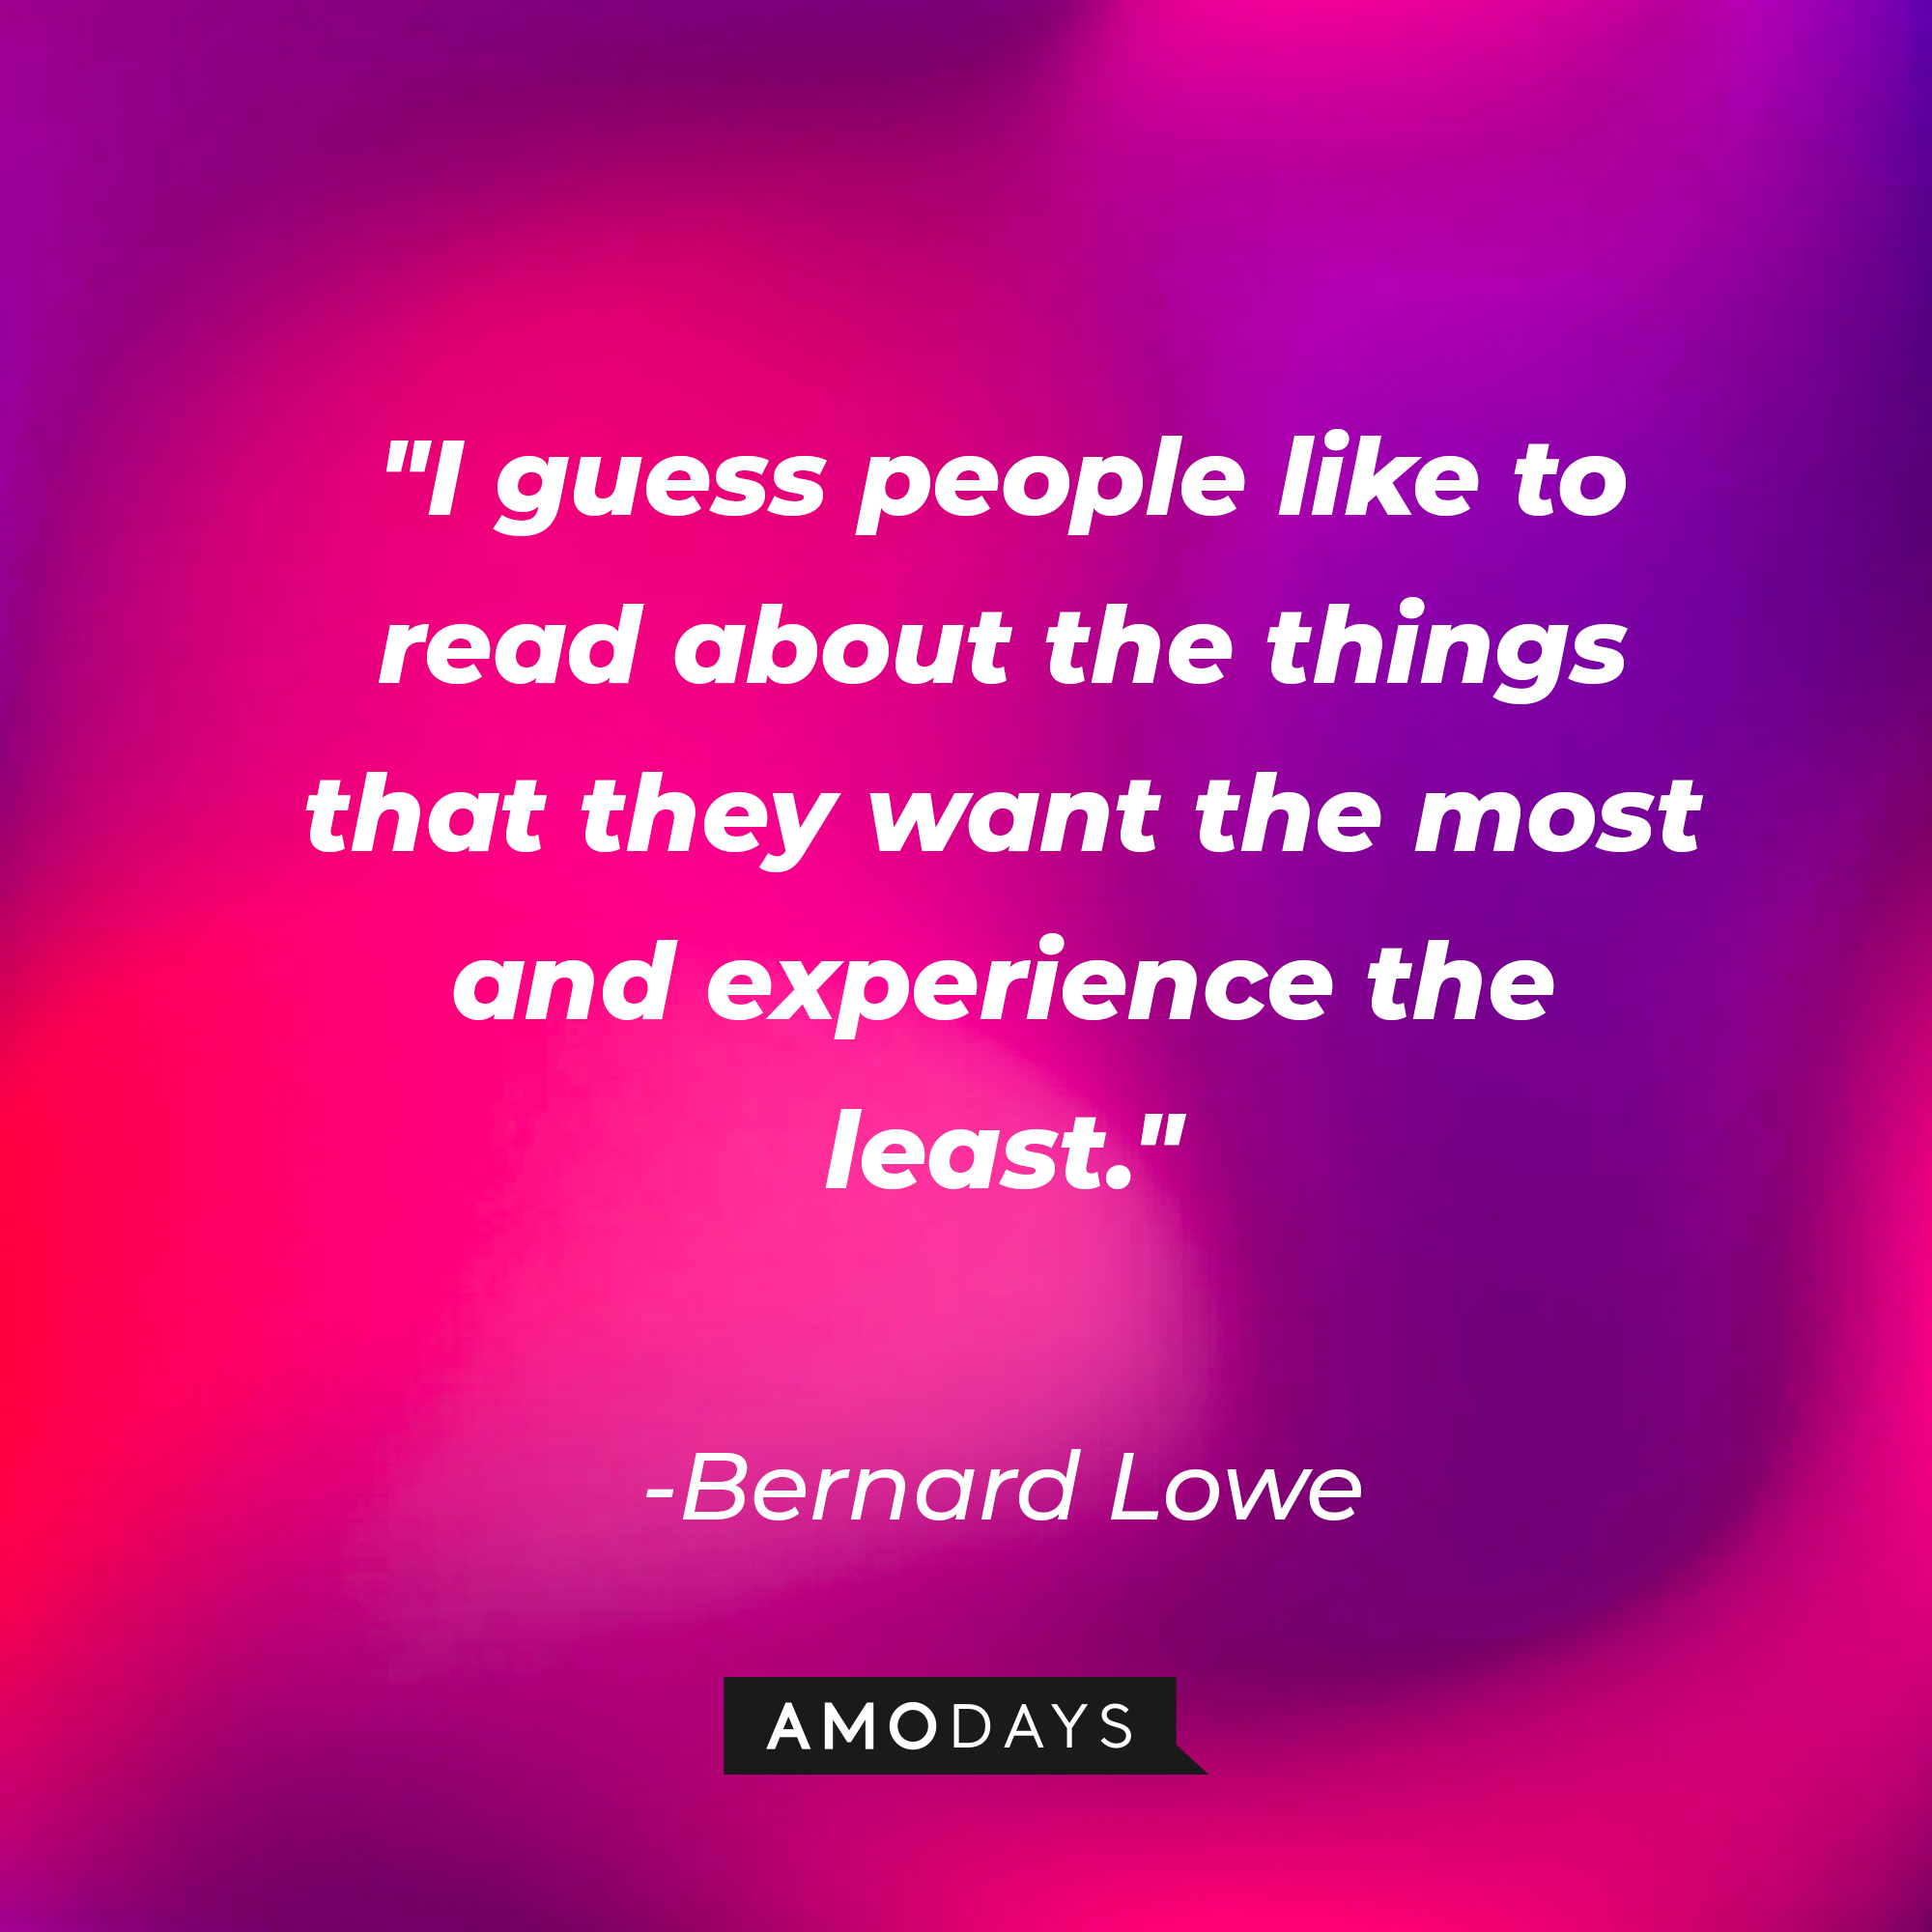 Bernard Lowe's quote: "I guess people like to read about the things that they want the most and experience the least." | Source: AmoDays